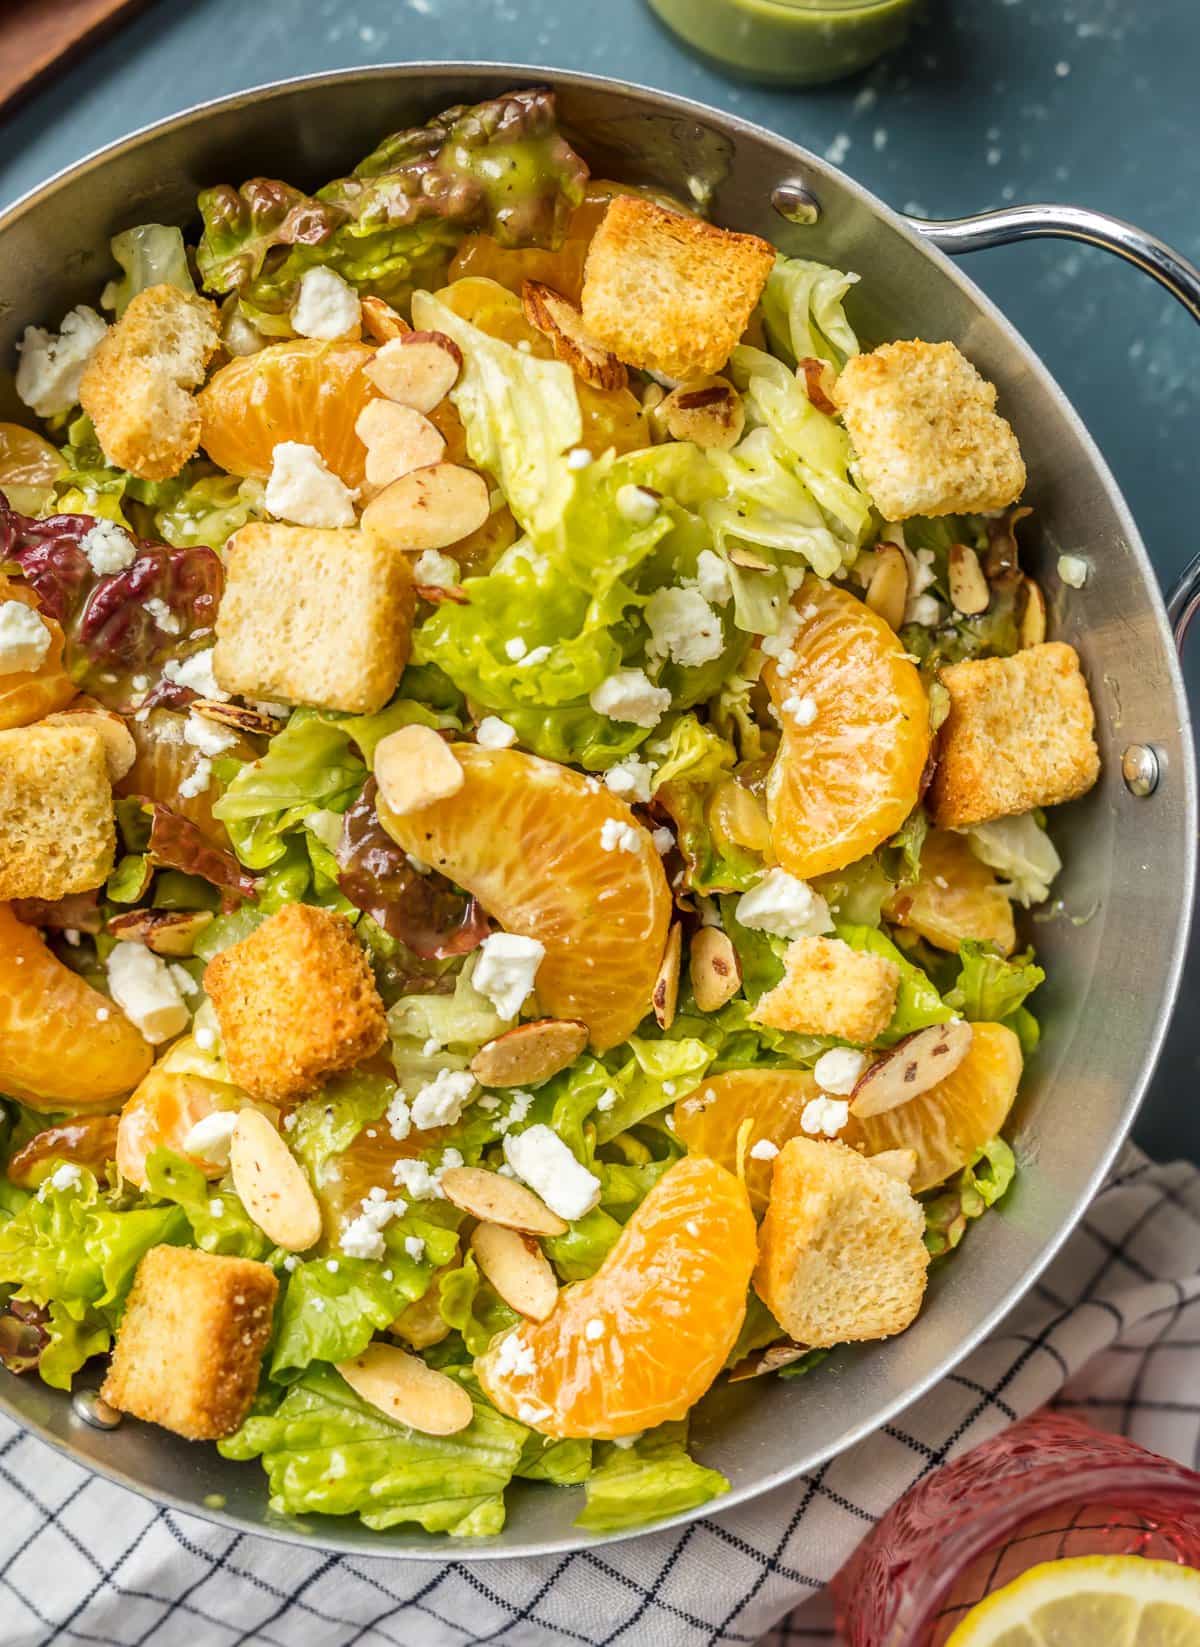 Large silver bowl filled with lettuce, mandarin oranges, almonds, and feta